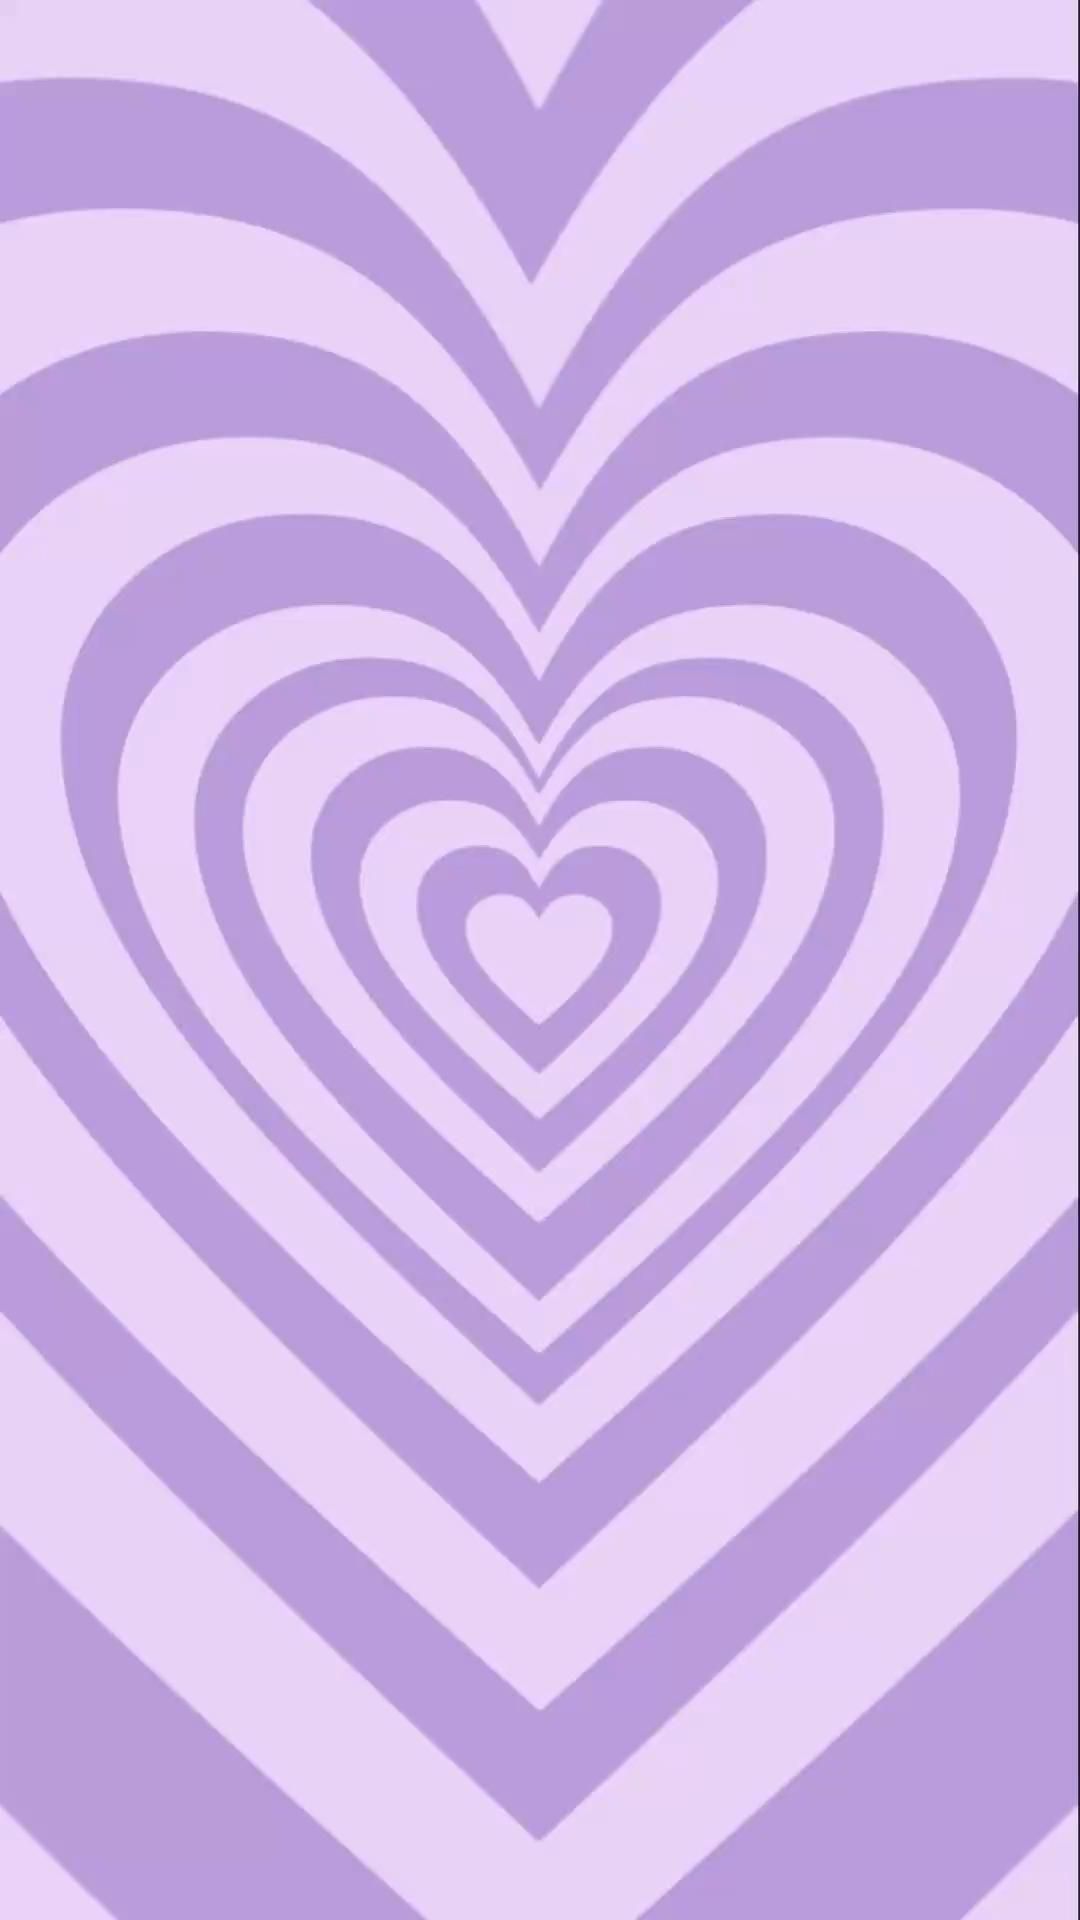 Aesthetic purple hearts wallpaper for iPhone with high resolution 1080x1920 pixel. You can use this wallpaper for your iPhone 5, 6, 7, 8, X, XS, XR backgrounds, Mobile Screensaver, or iPad Lock Screen - Pastel purple